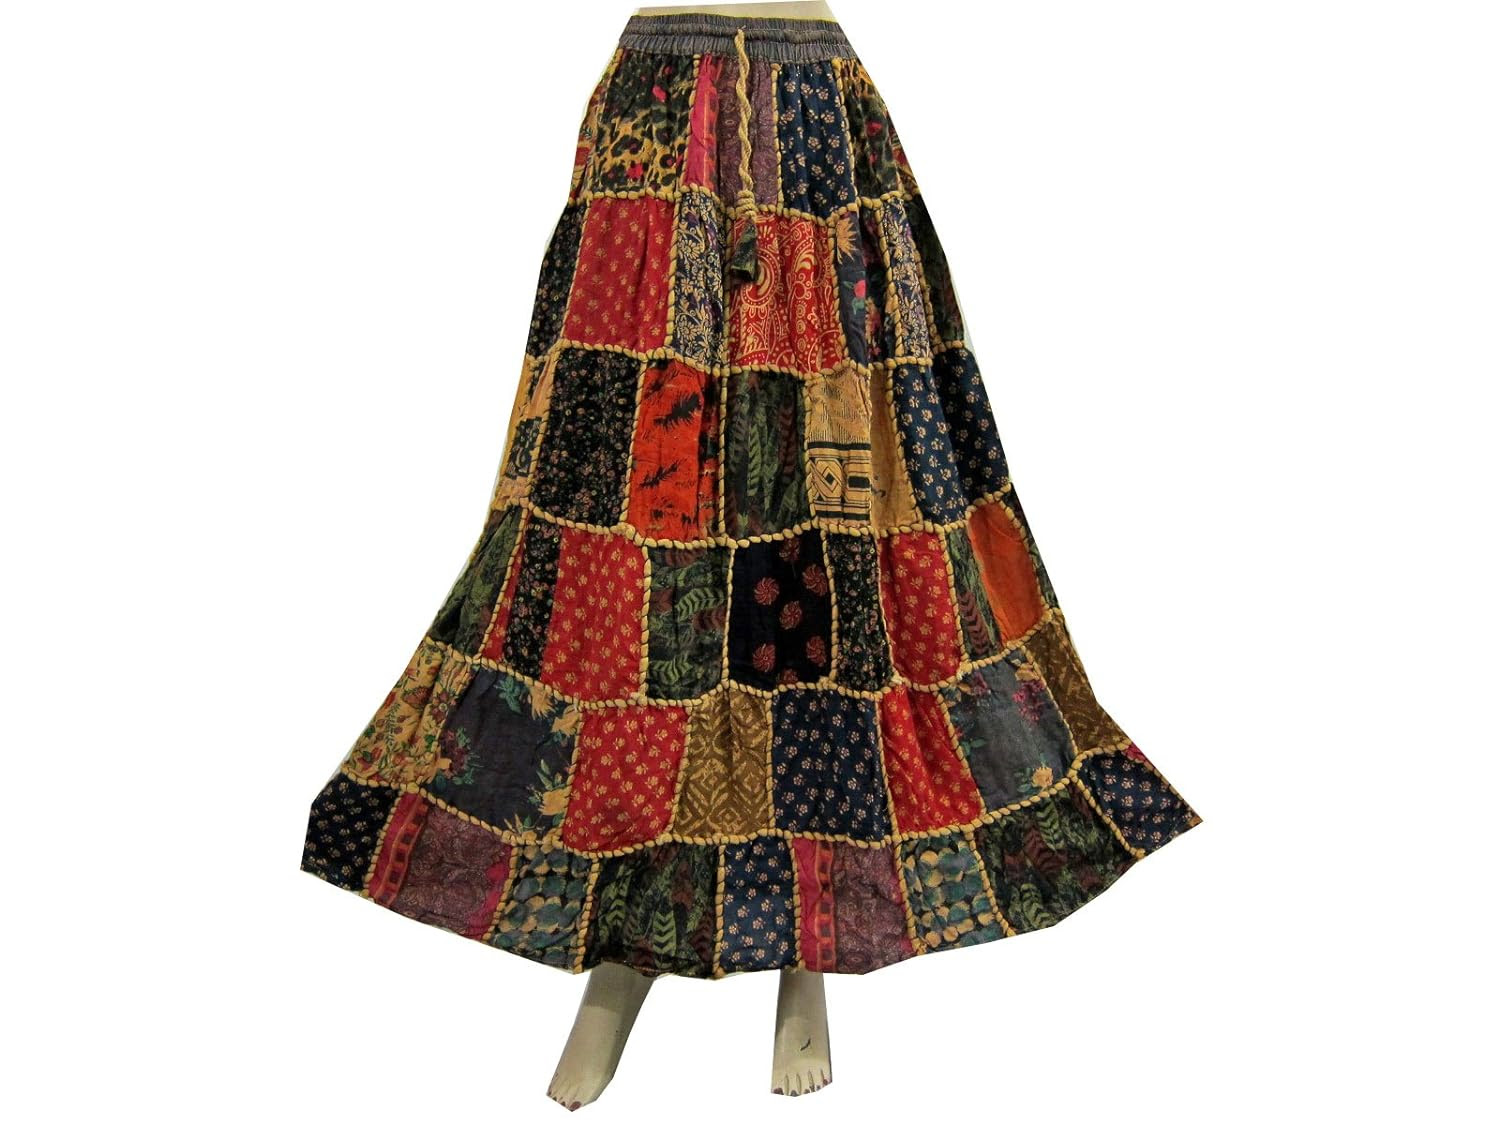 Bohemian Skirts For Women: Bellydance Gypsy Patchwork Skirts